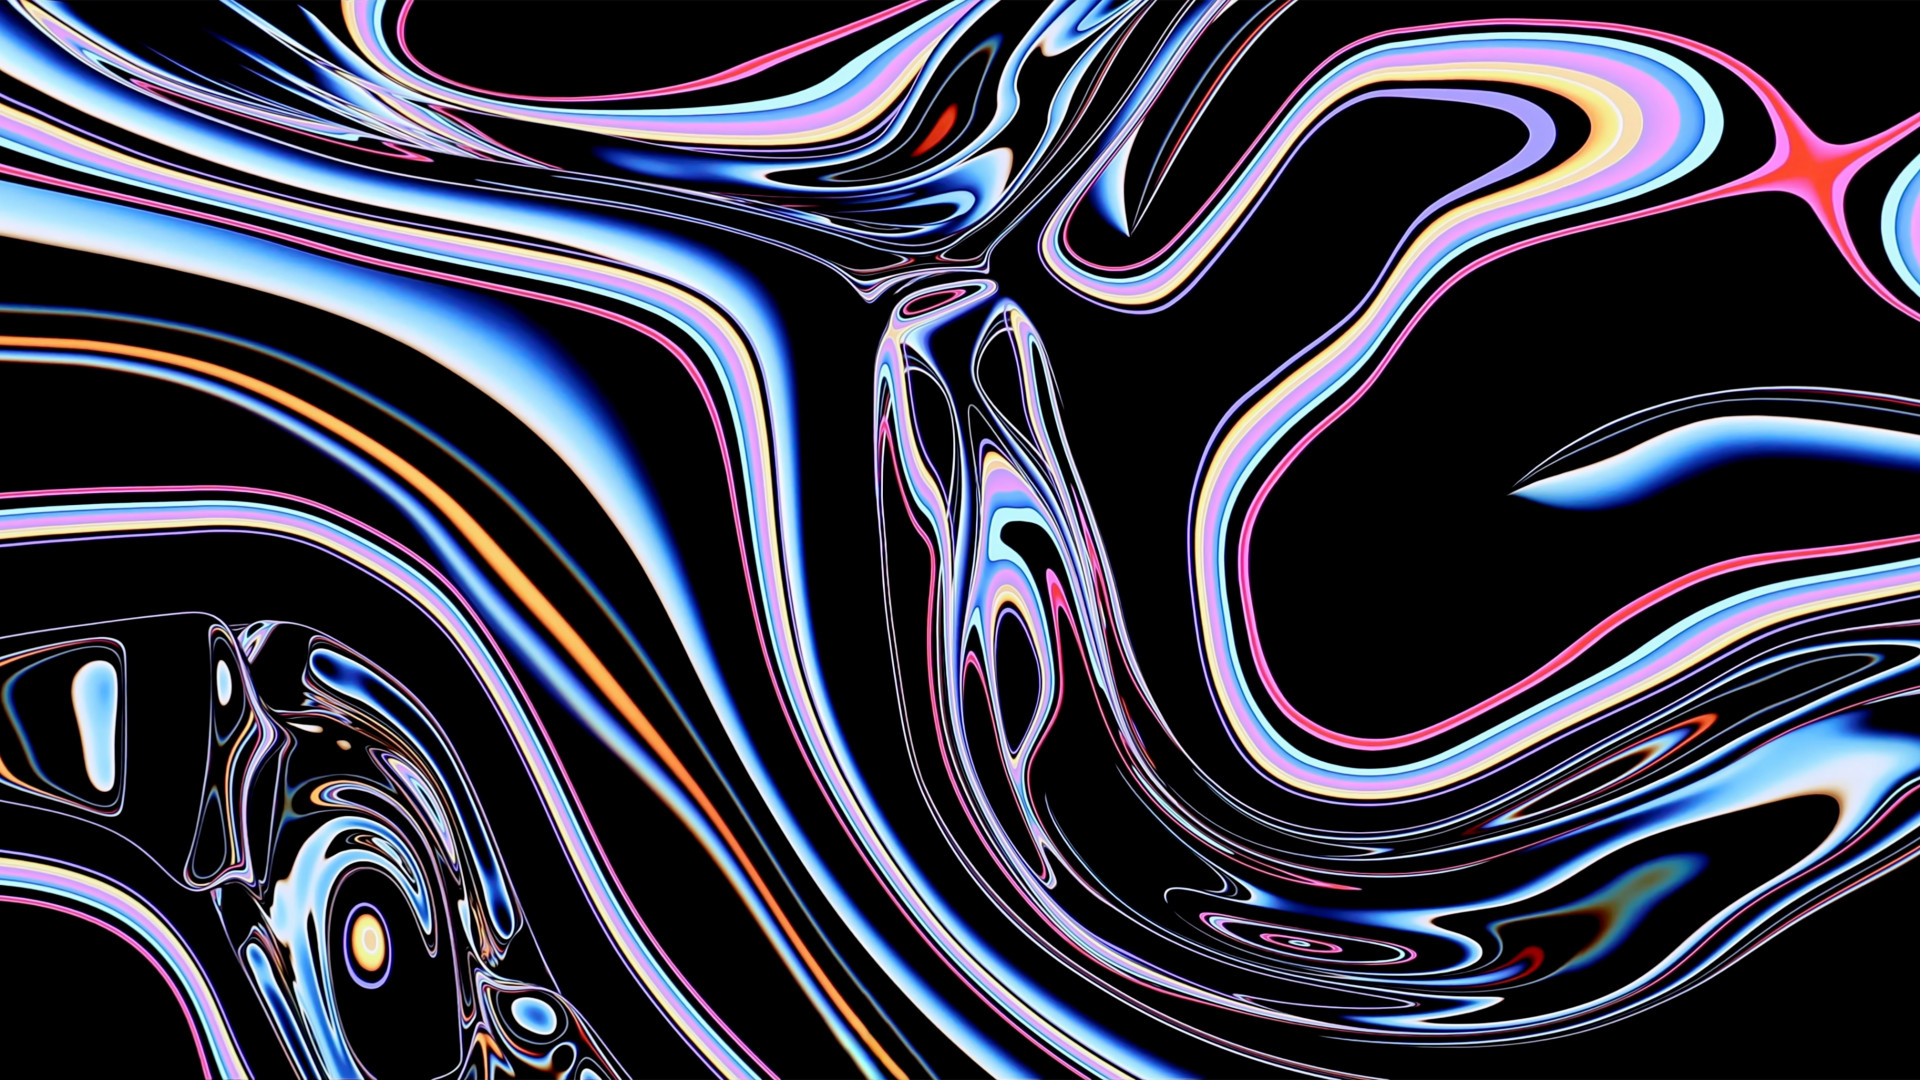 Wallpaper Apple Pro Display XDR, abstract, 4k, WWDC 2019, OS #21619